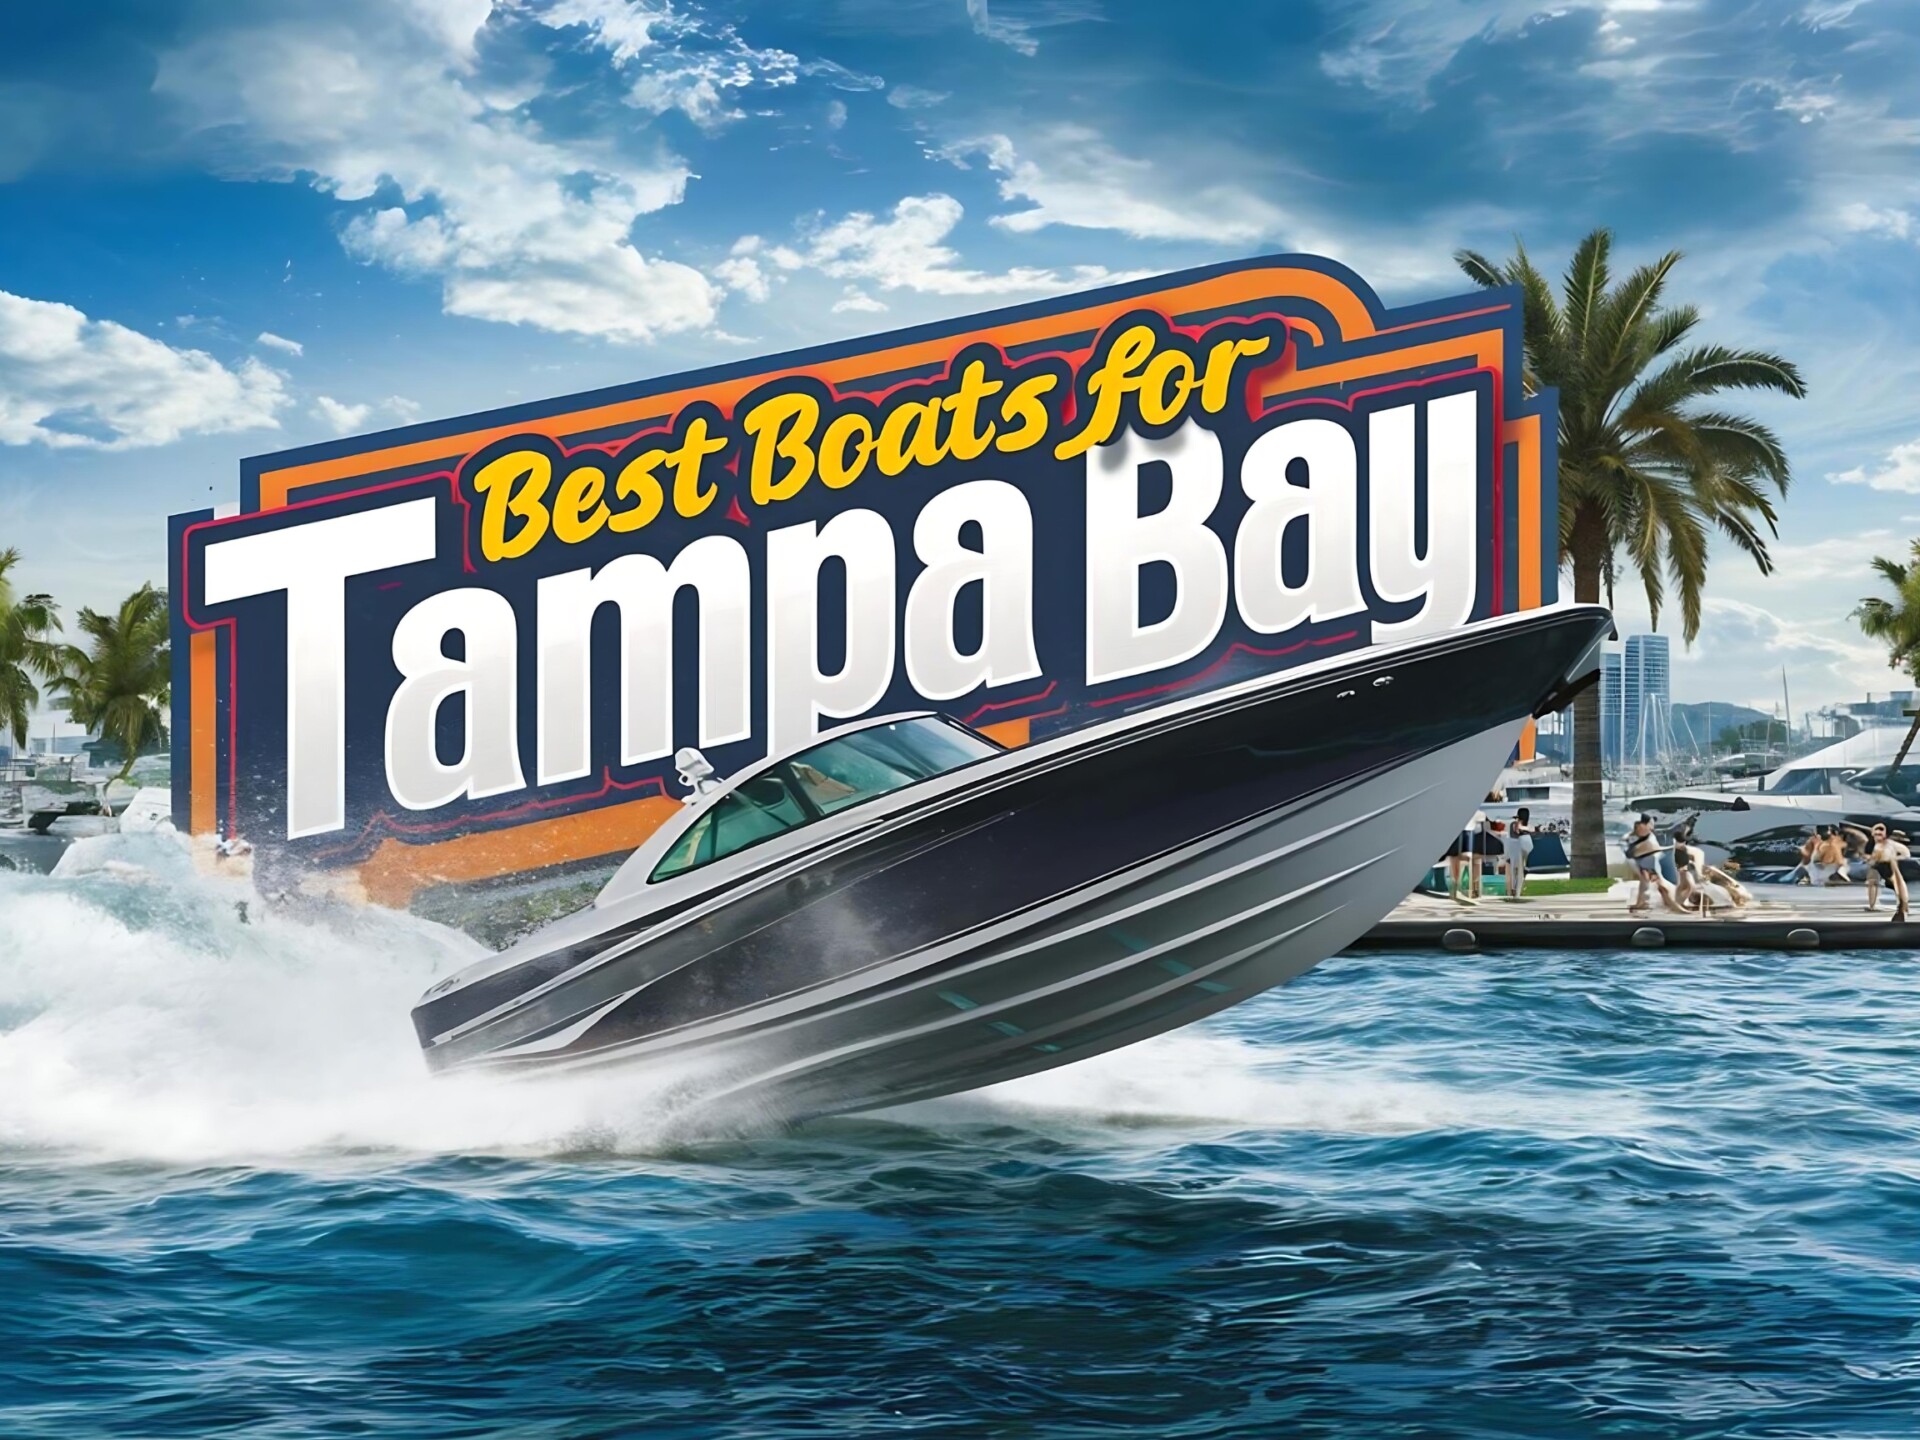 Best Boats for Tampa